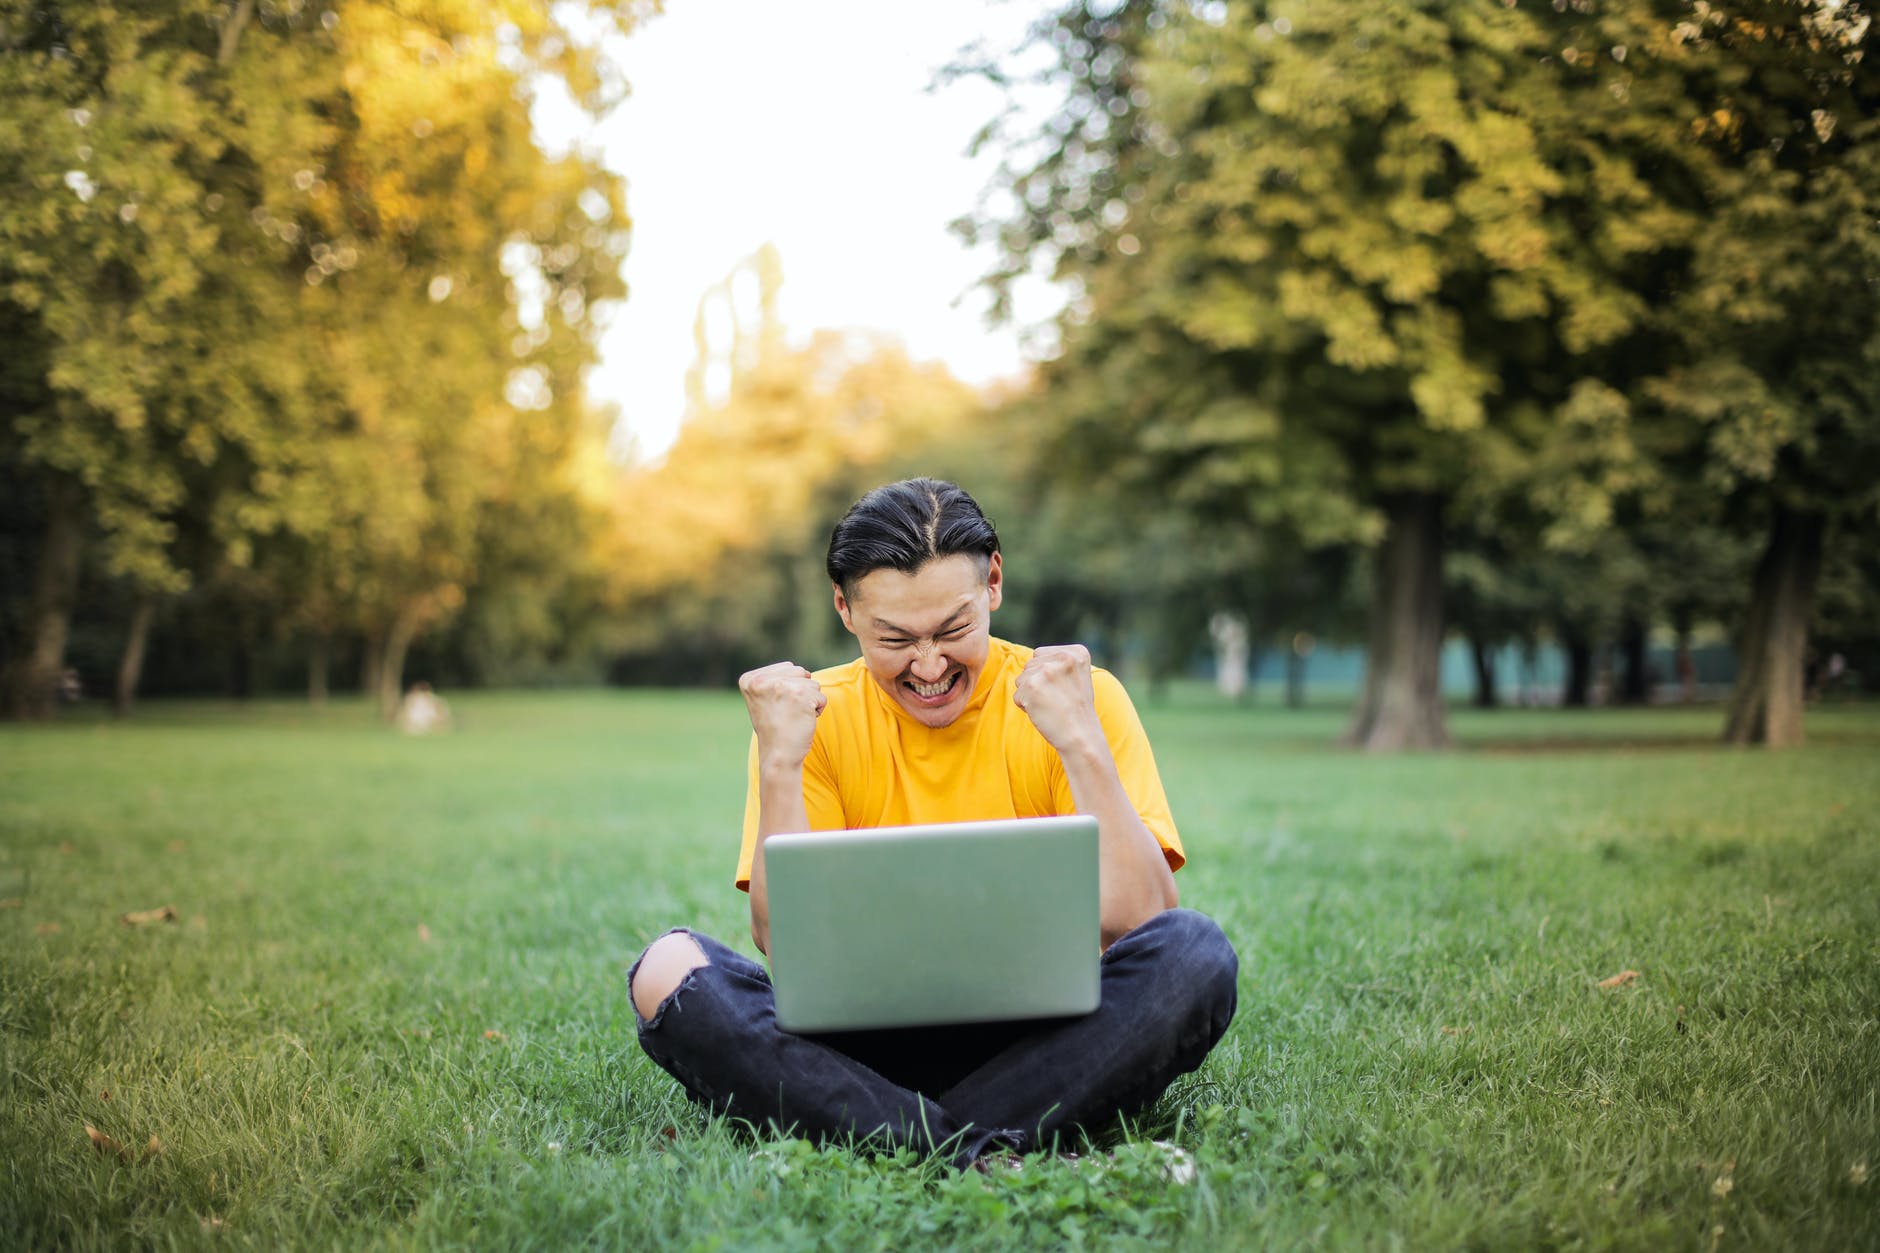 Image Description:
a young masculine presenting person sitting on a green grass field with a laptop and both arms raised, and fists clenched excitedly with superimposed text reading, “Referencing with Mendeley in 8 Steps”. 
End of Image Description